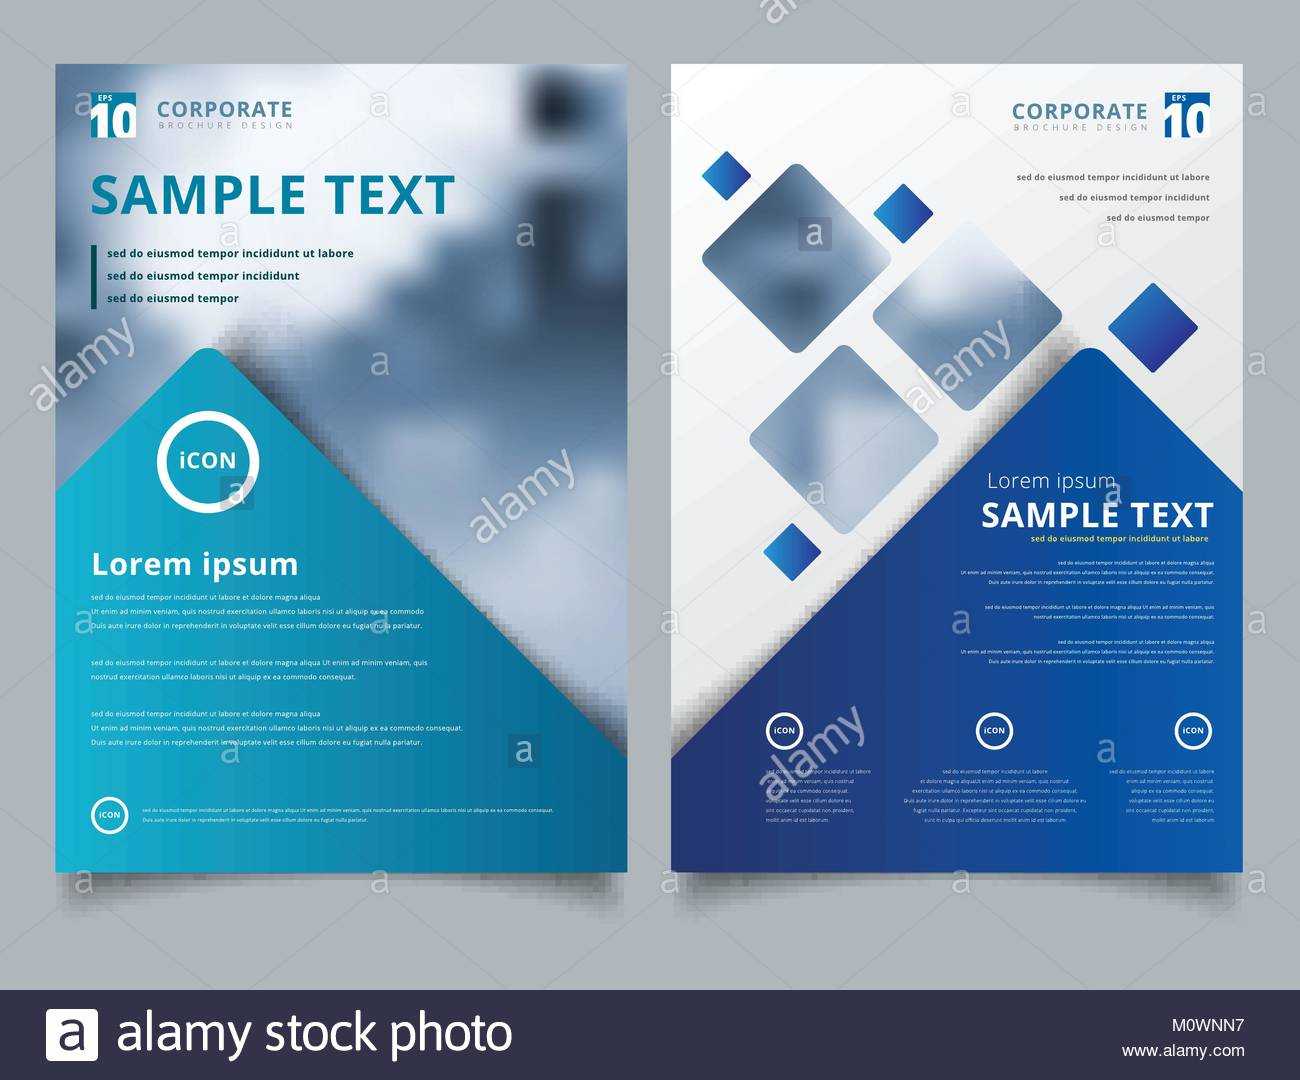 Free Poster Design Templates Illustrator With Scientific Within Free Illustrator Brochure Templates Download